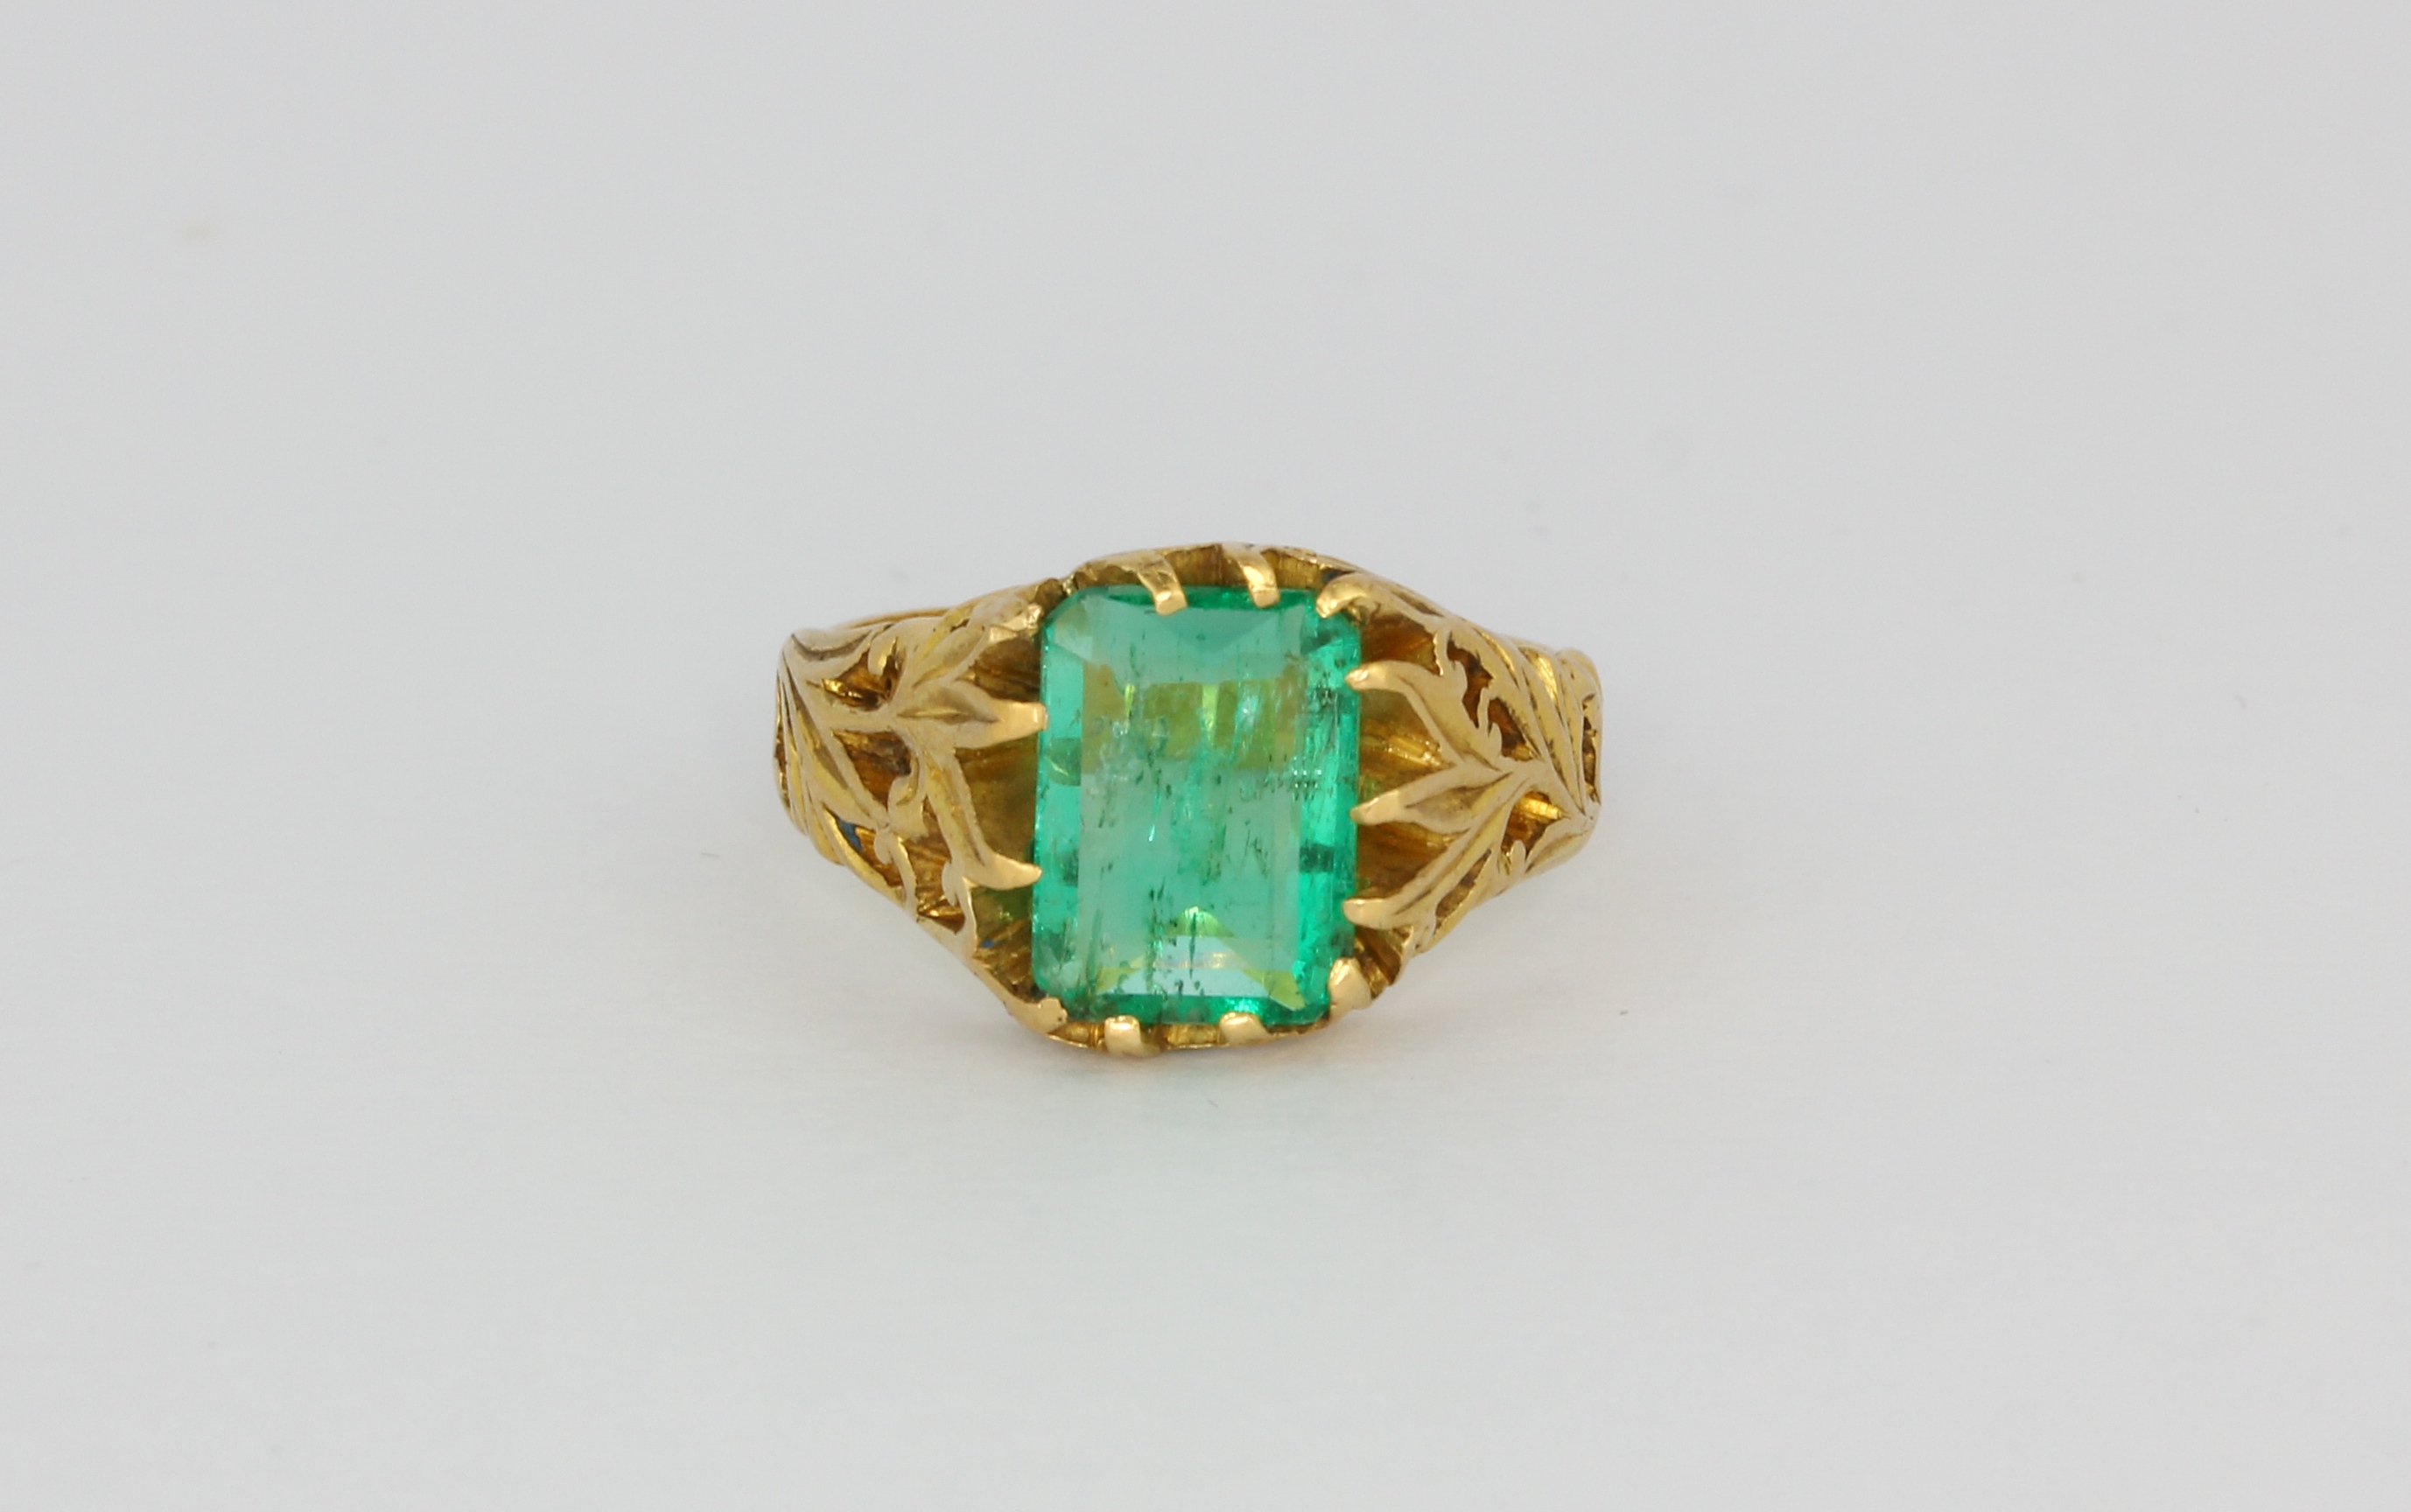 A yellow metal (tested high carat gold) ring set with an emerald cut Columbian emerald, with a GCS